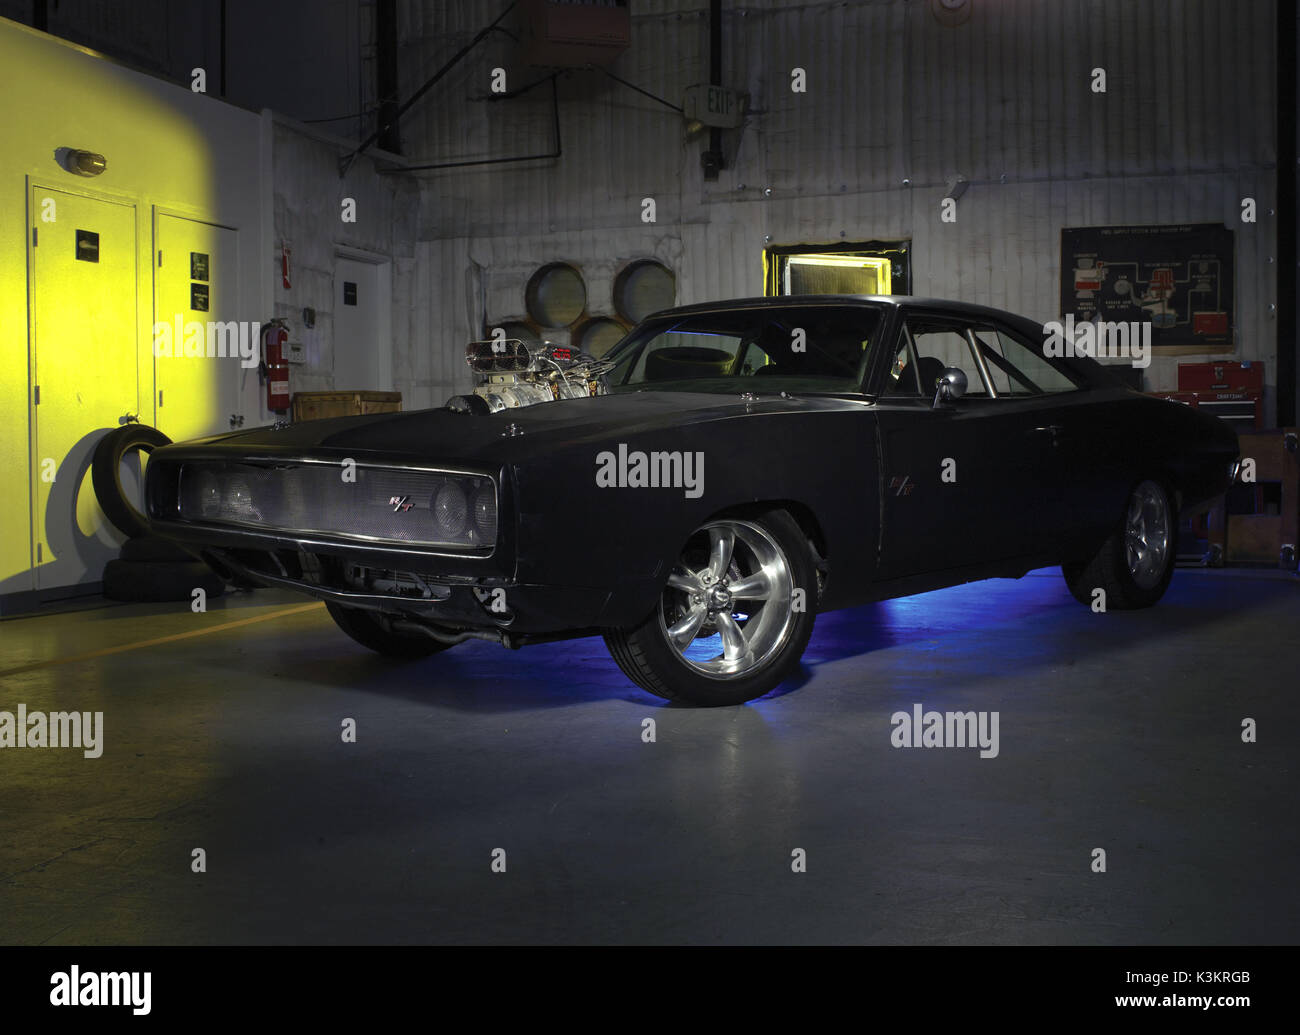 Dominic Toretto's 1970 Dodge Charger from Fast & Furious Movie